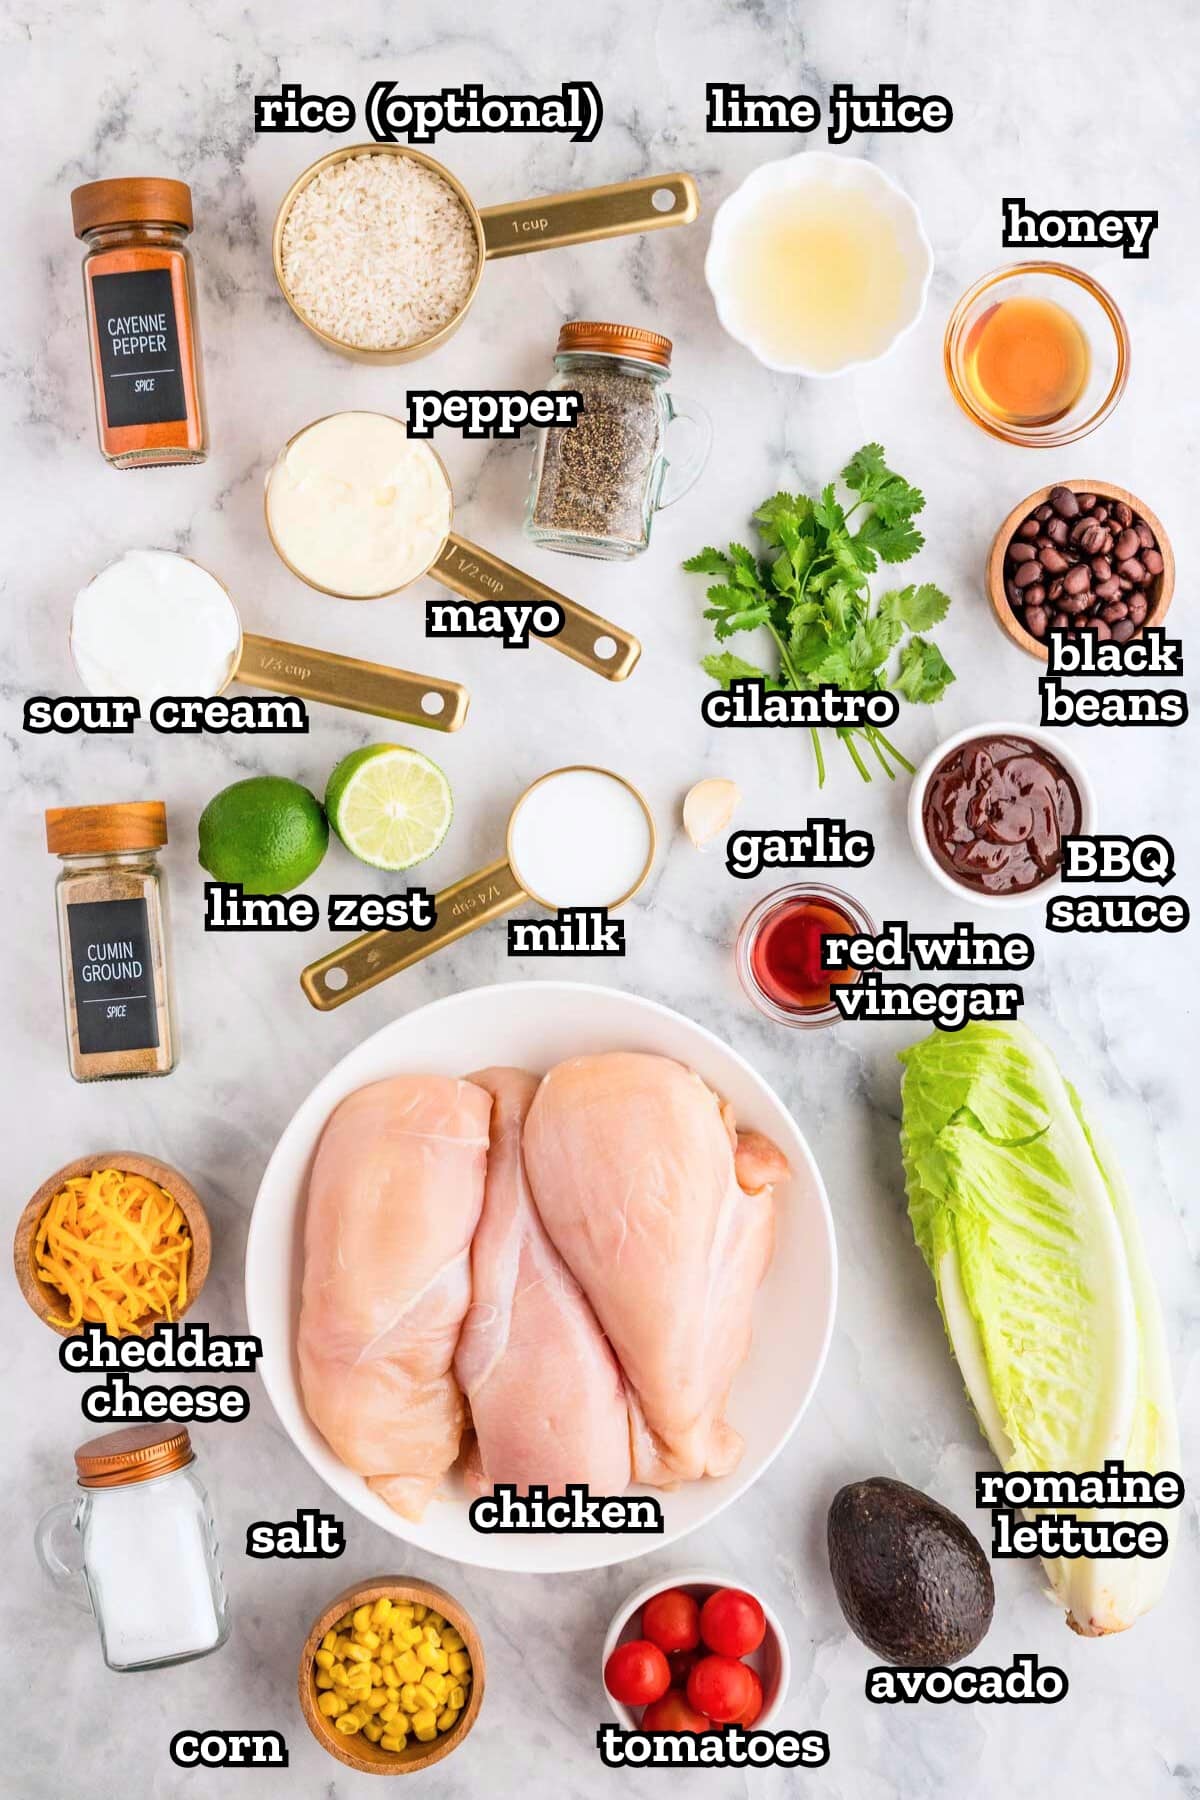 Labeled ingredients need for BBQ chicken salad recipe.